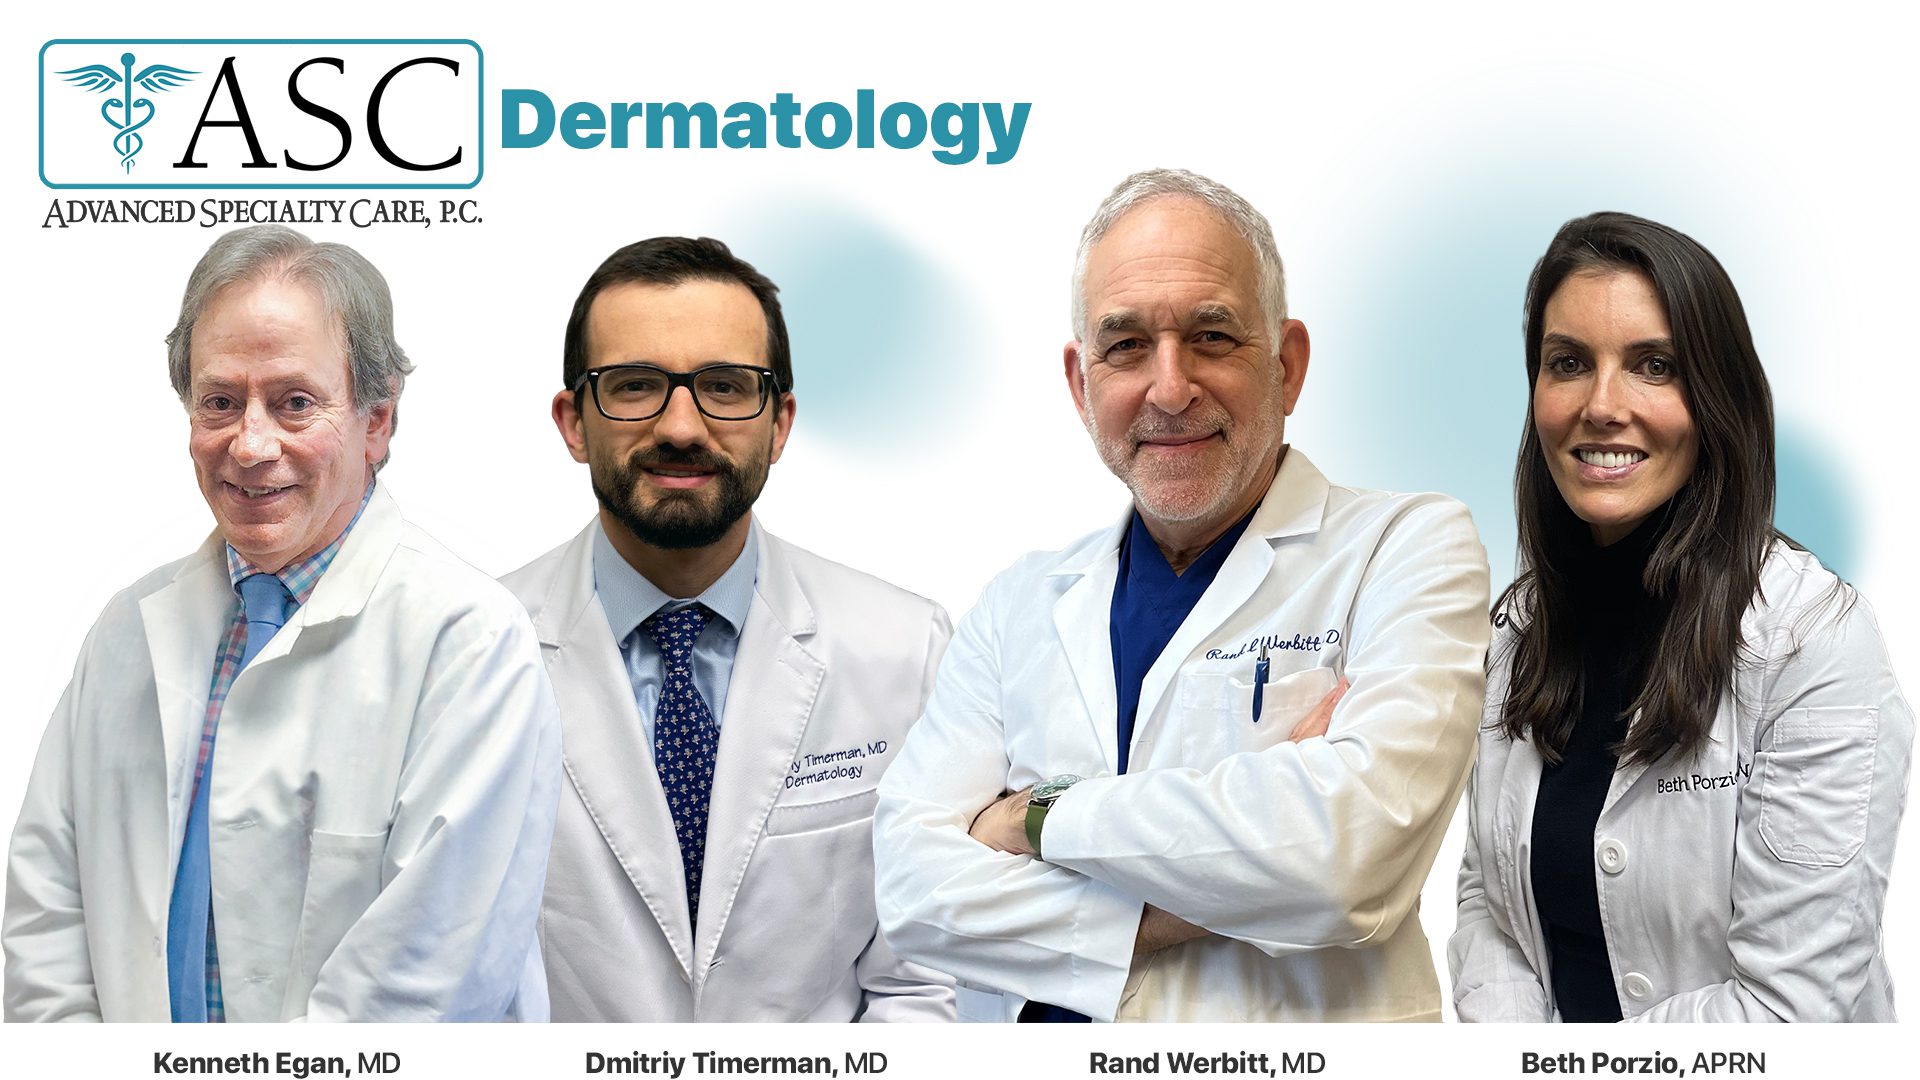 Board-certified Dermatologists at Advanced Specialty Care--Drs. Kenneth Egan, Dmitriy Timerman, Rand Werbitt, and Beth Porzio, APRN--with offices located in Danbury, New Milford, Ridgefield, Norwalk & Stamford, Connecticut.